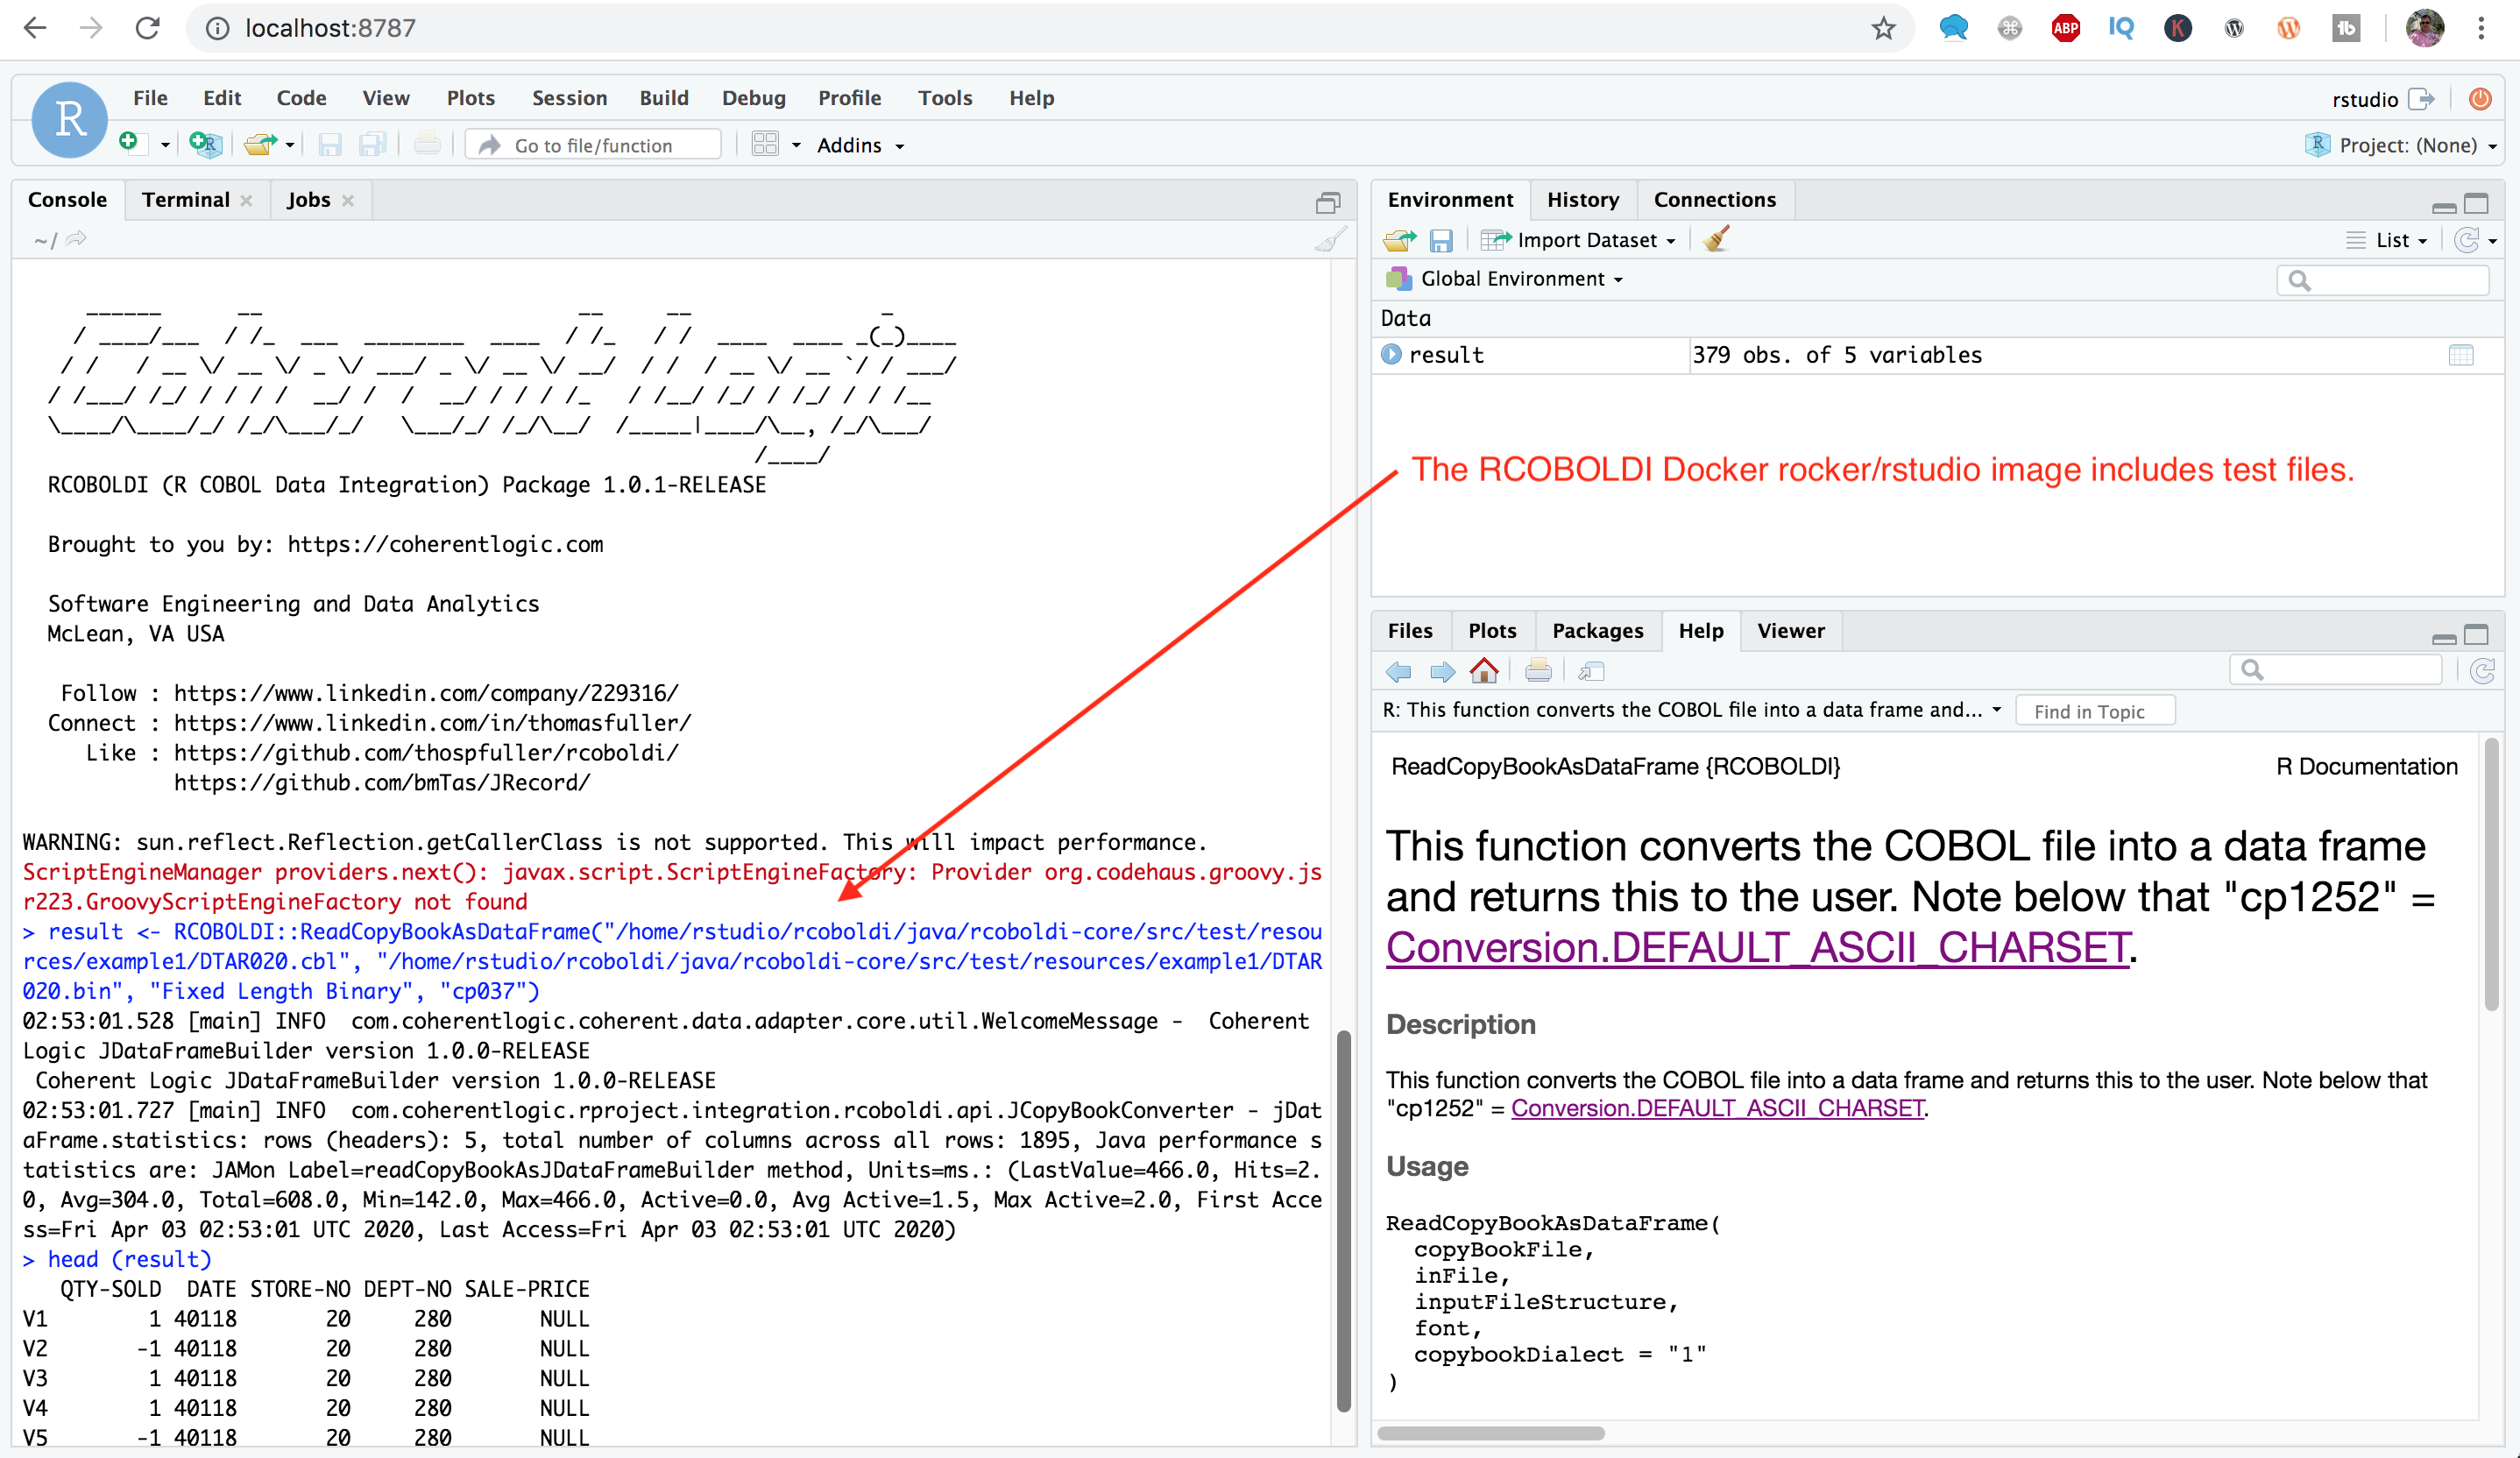 An example of the R COBOL Data Integration Package loading a file with the inputFileStructure set to "Fixed Length Binary" and the font set to "cp037". This should work out-of-the-box with a container built from the rcoboldi:rocker-rstudio image."